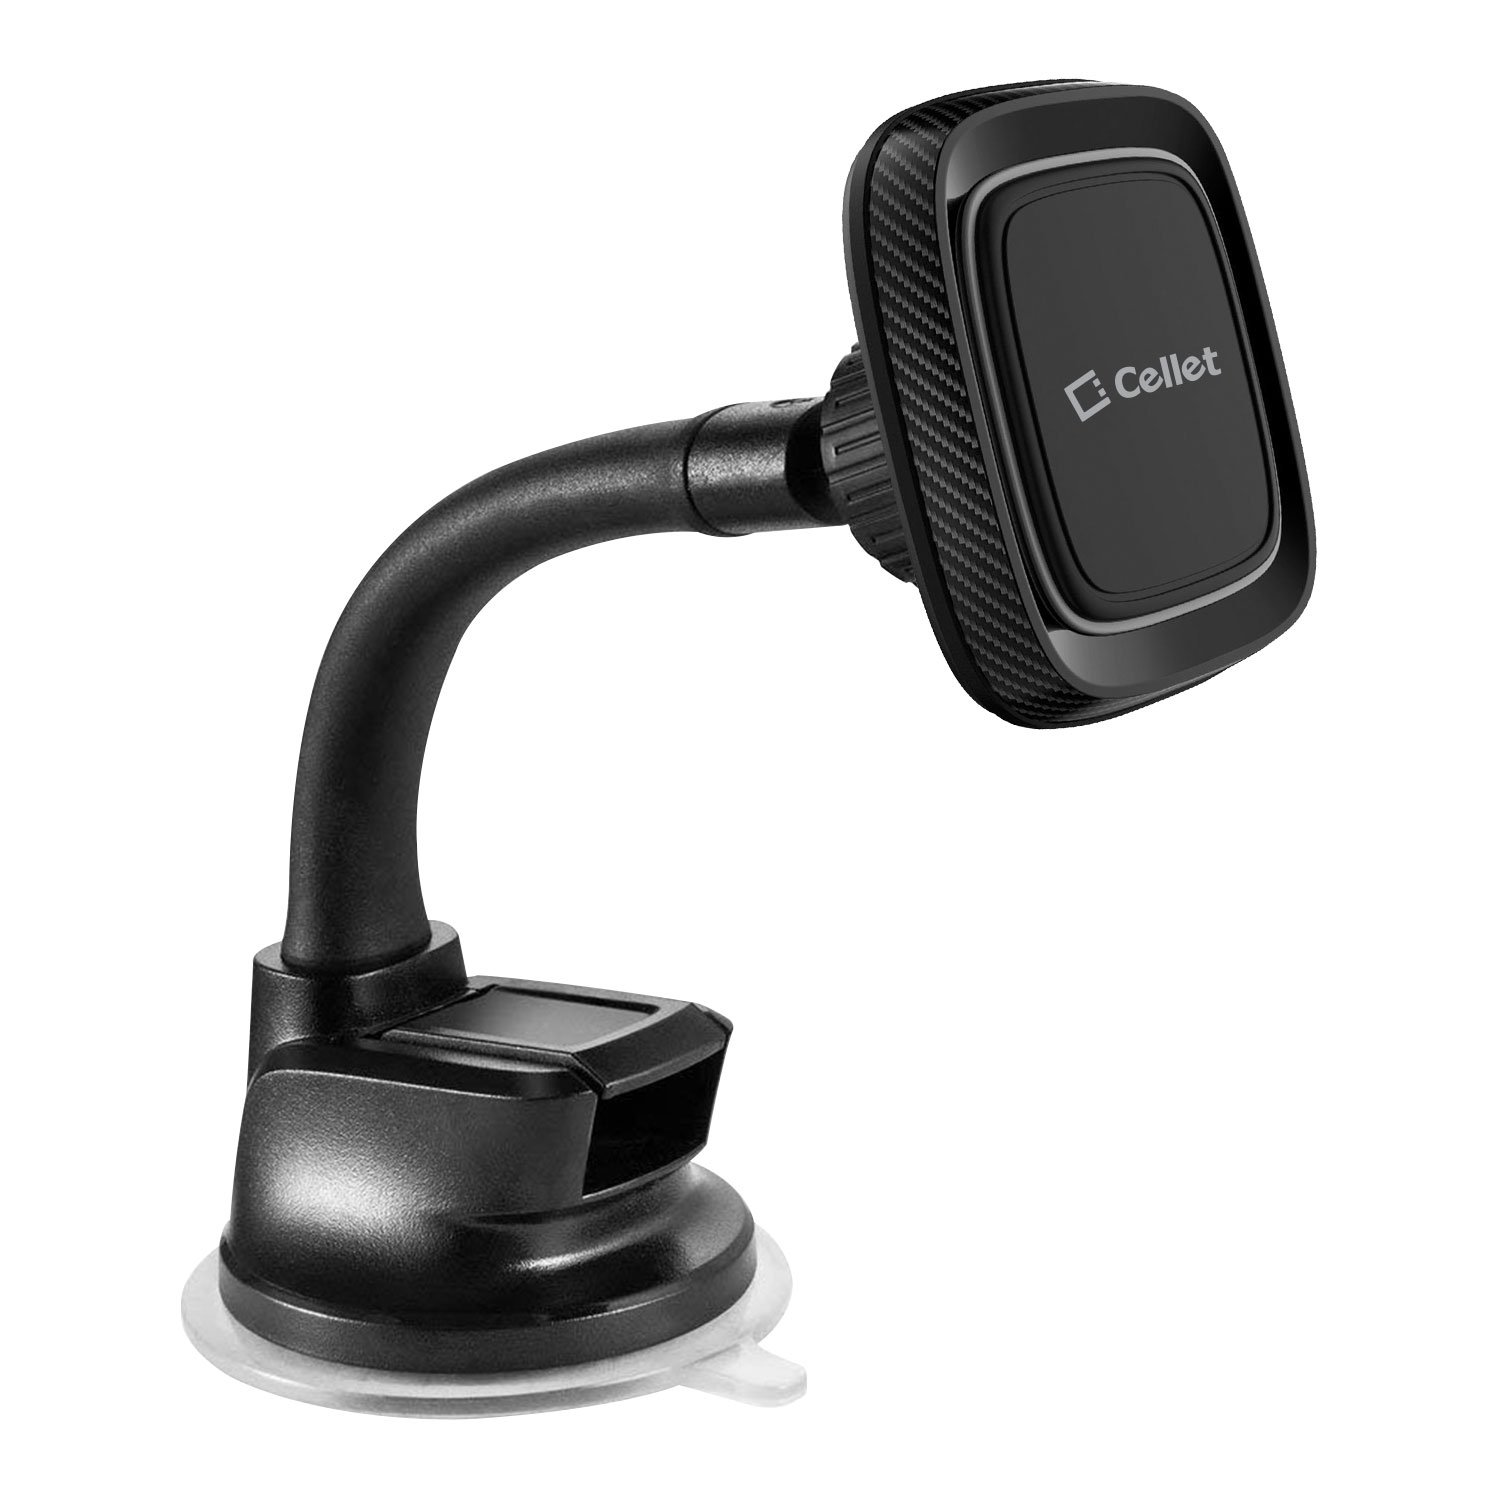 Cellet Suction Cup Dashboard and Windshield Mount Phone Cradle, Magnetic Phone Holder, Desk Mount with Flexible Goose Neck Compatible with iPhones Samsung Galaxy, Note, Motorola Moto, Google Pixel